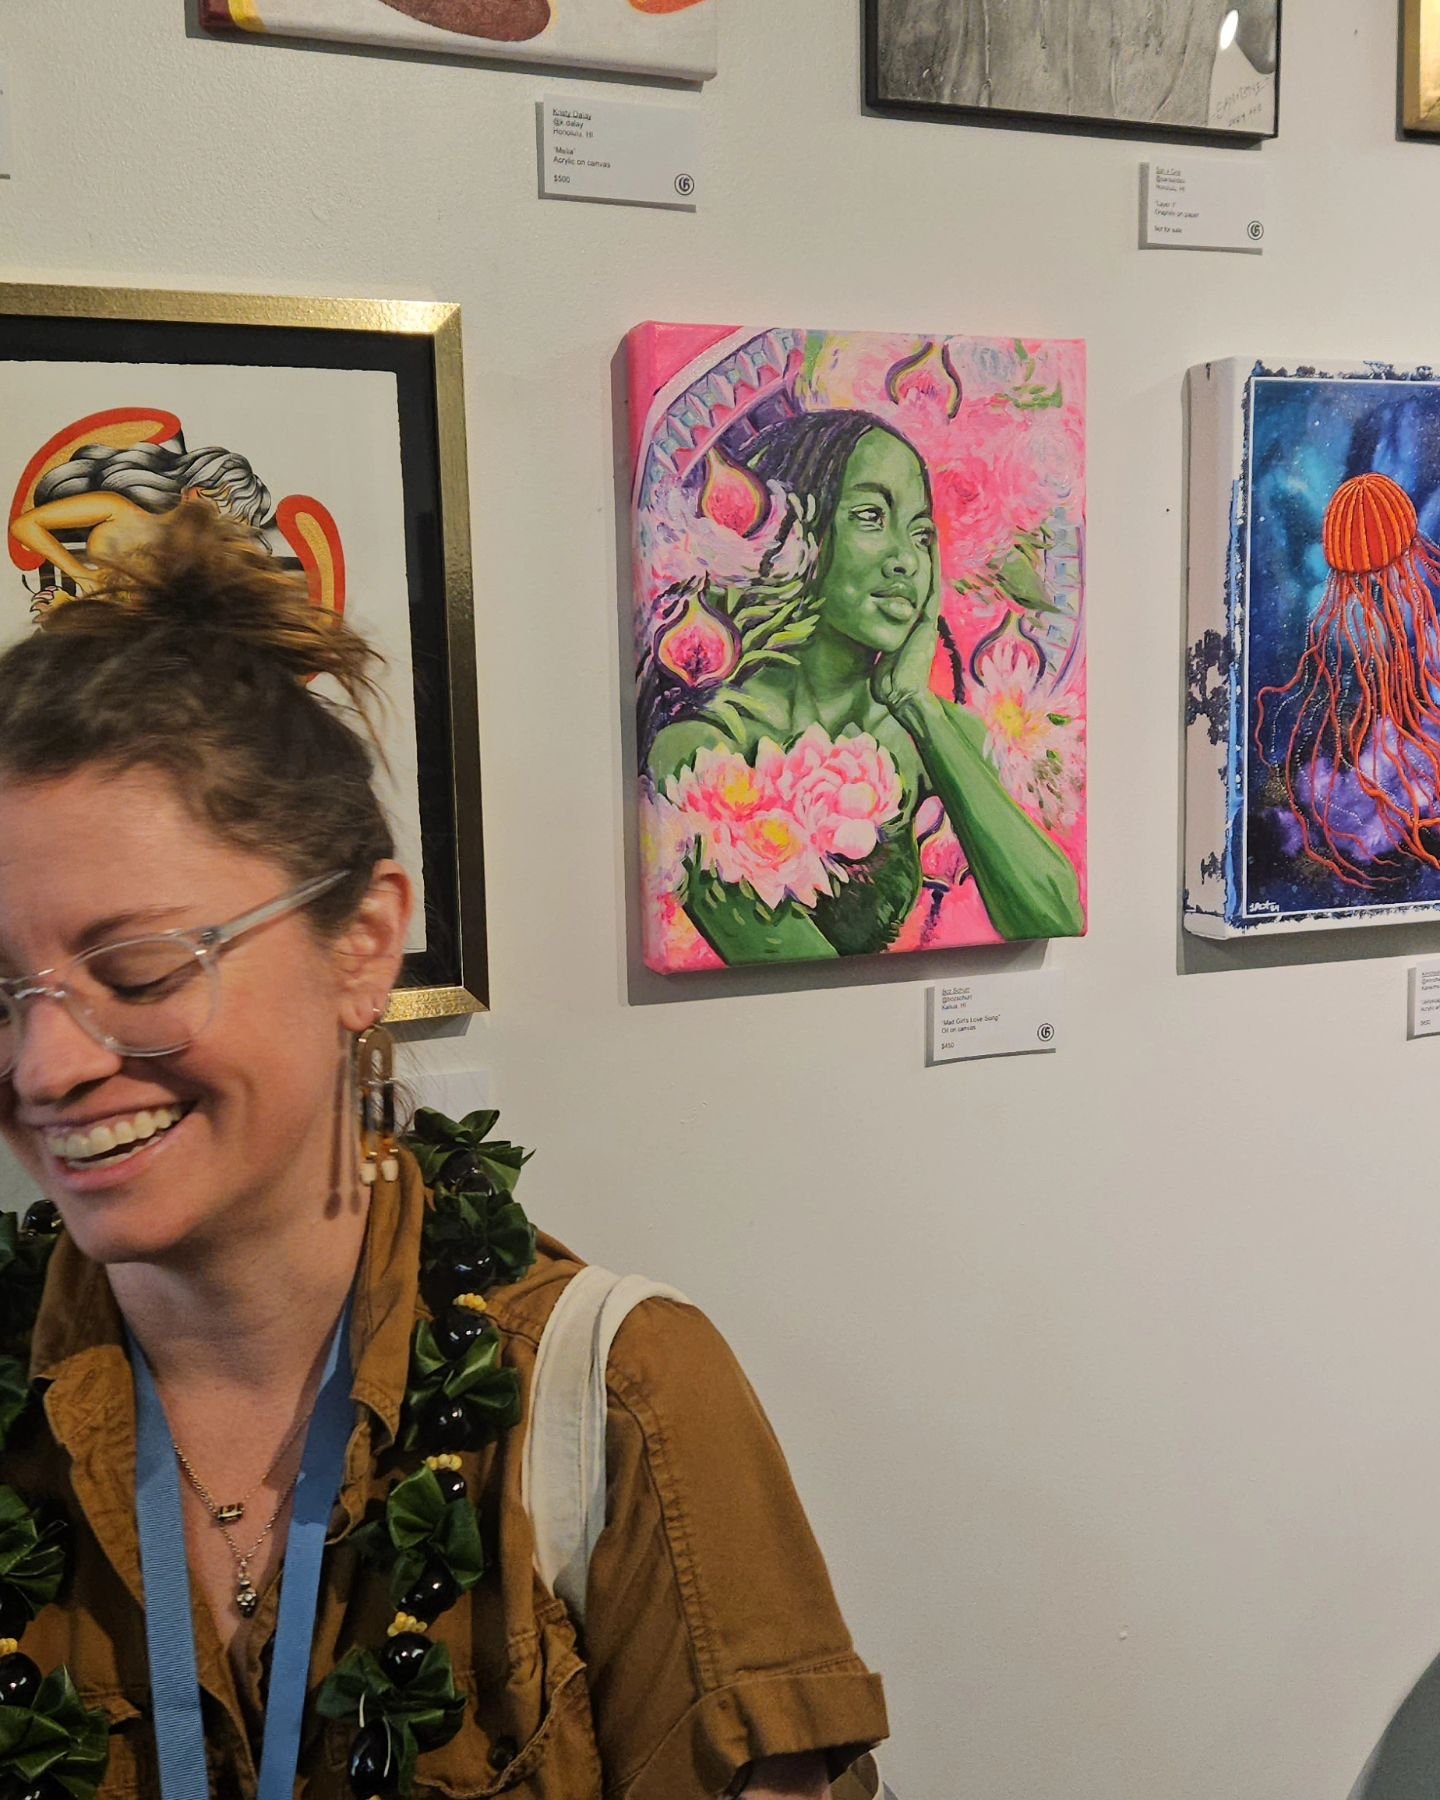 Throwback to the opening reception of EmpowerHER at @thegangway_gallery. I didn't manage to get pics with all my incredible artist pals because it was so packed! But it was a great night of cool art, cool peeps, and cool music (by the might talented 